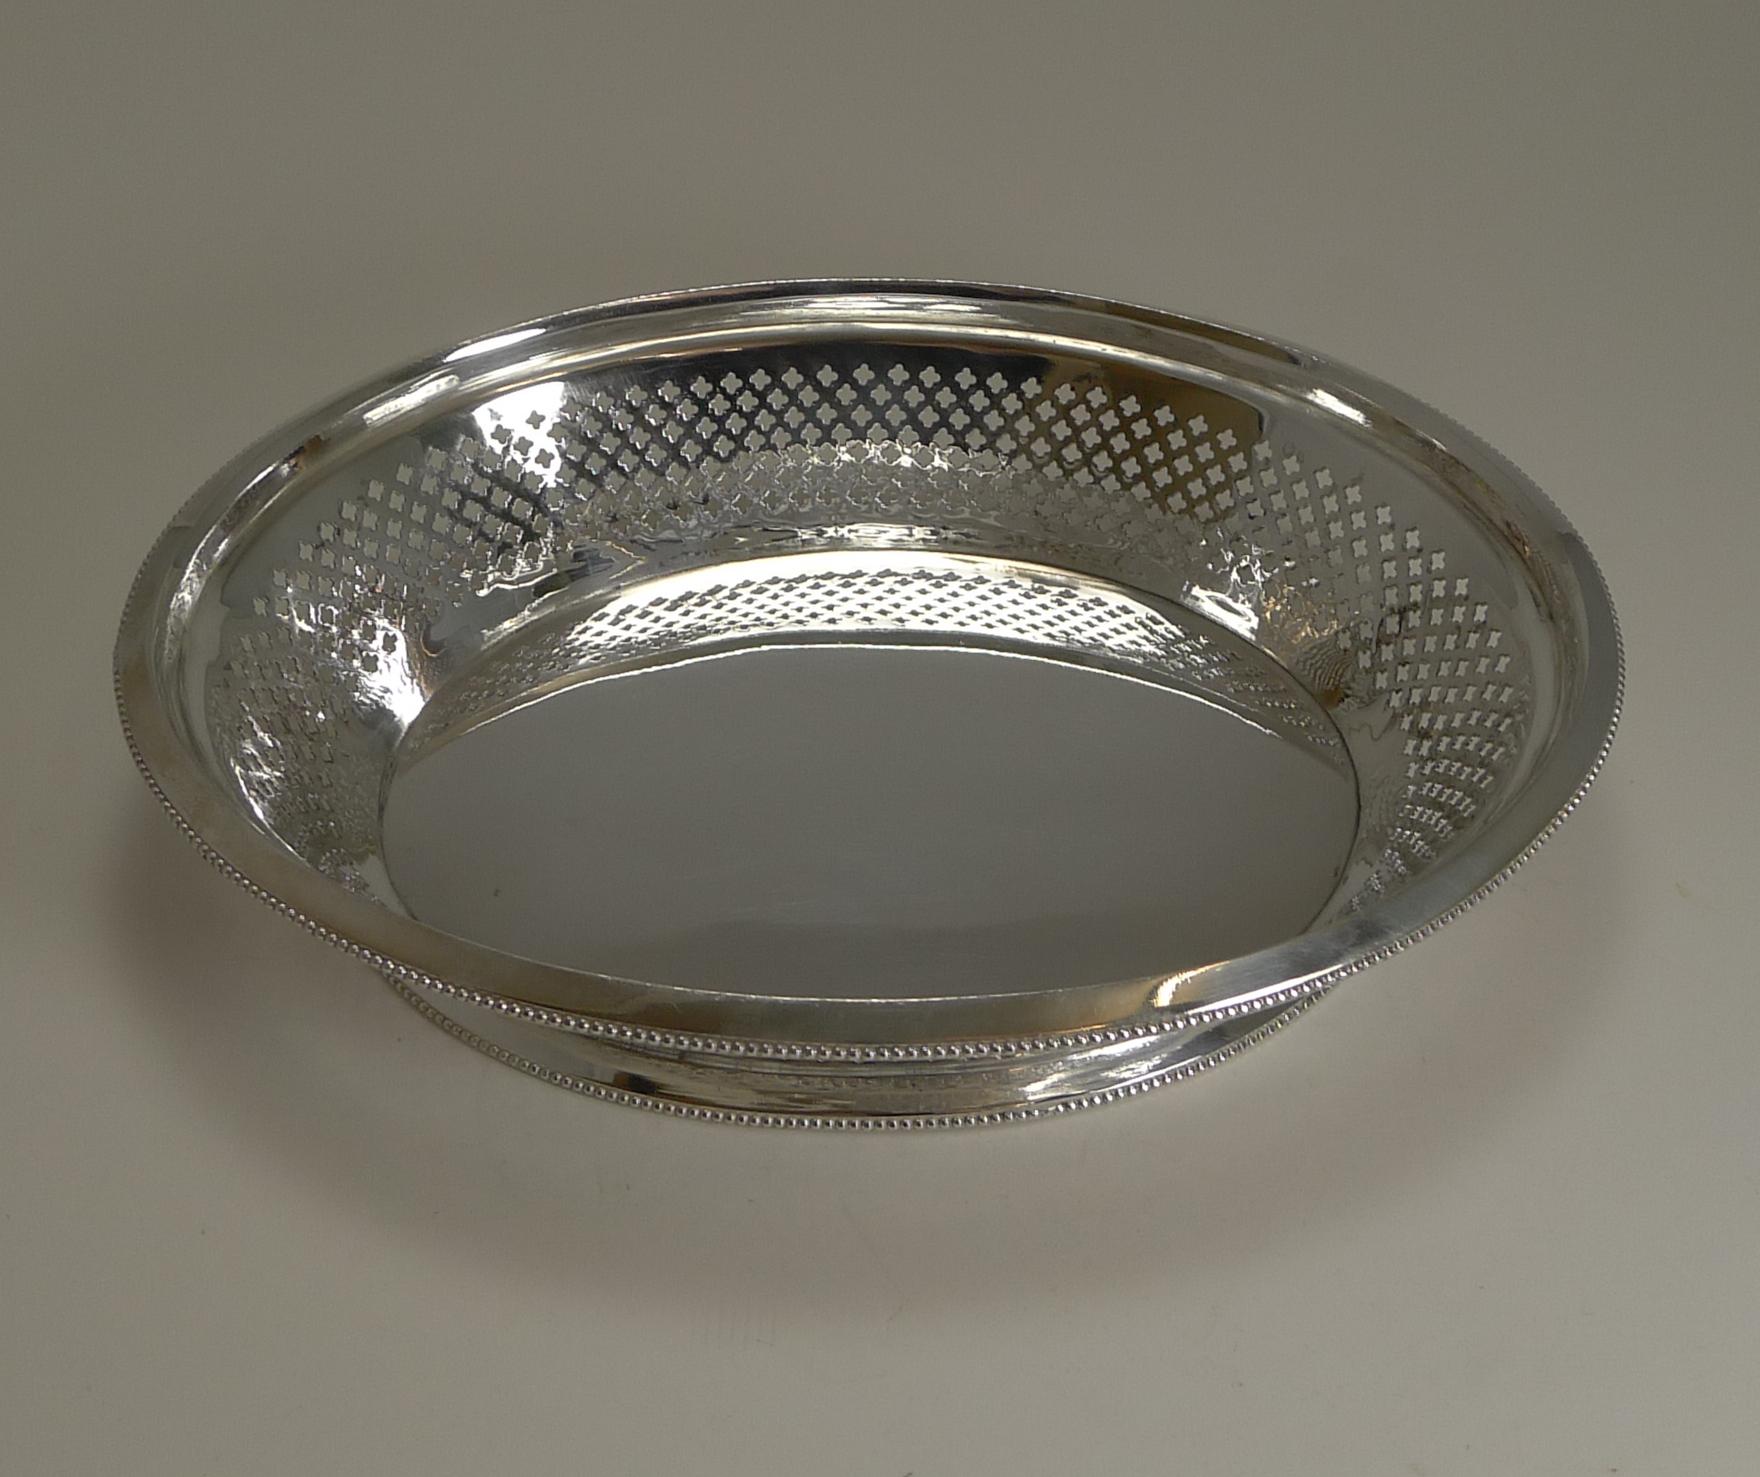 Late 19th Century Antique English Silver Plated Bread Basket by Atkin Brothers, Reg. 1873